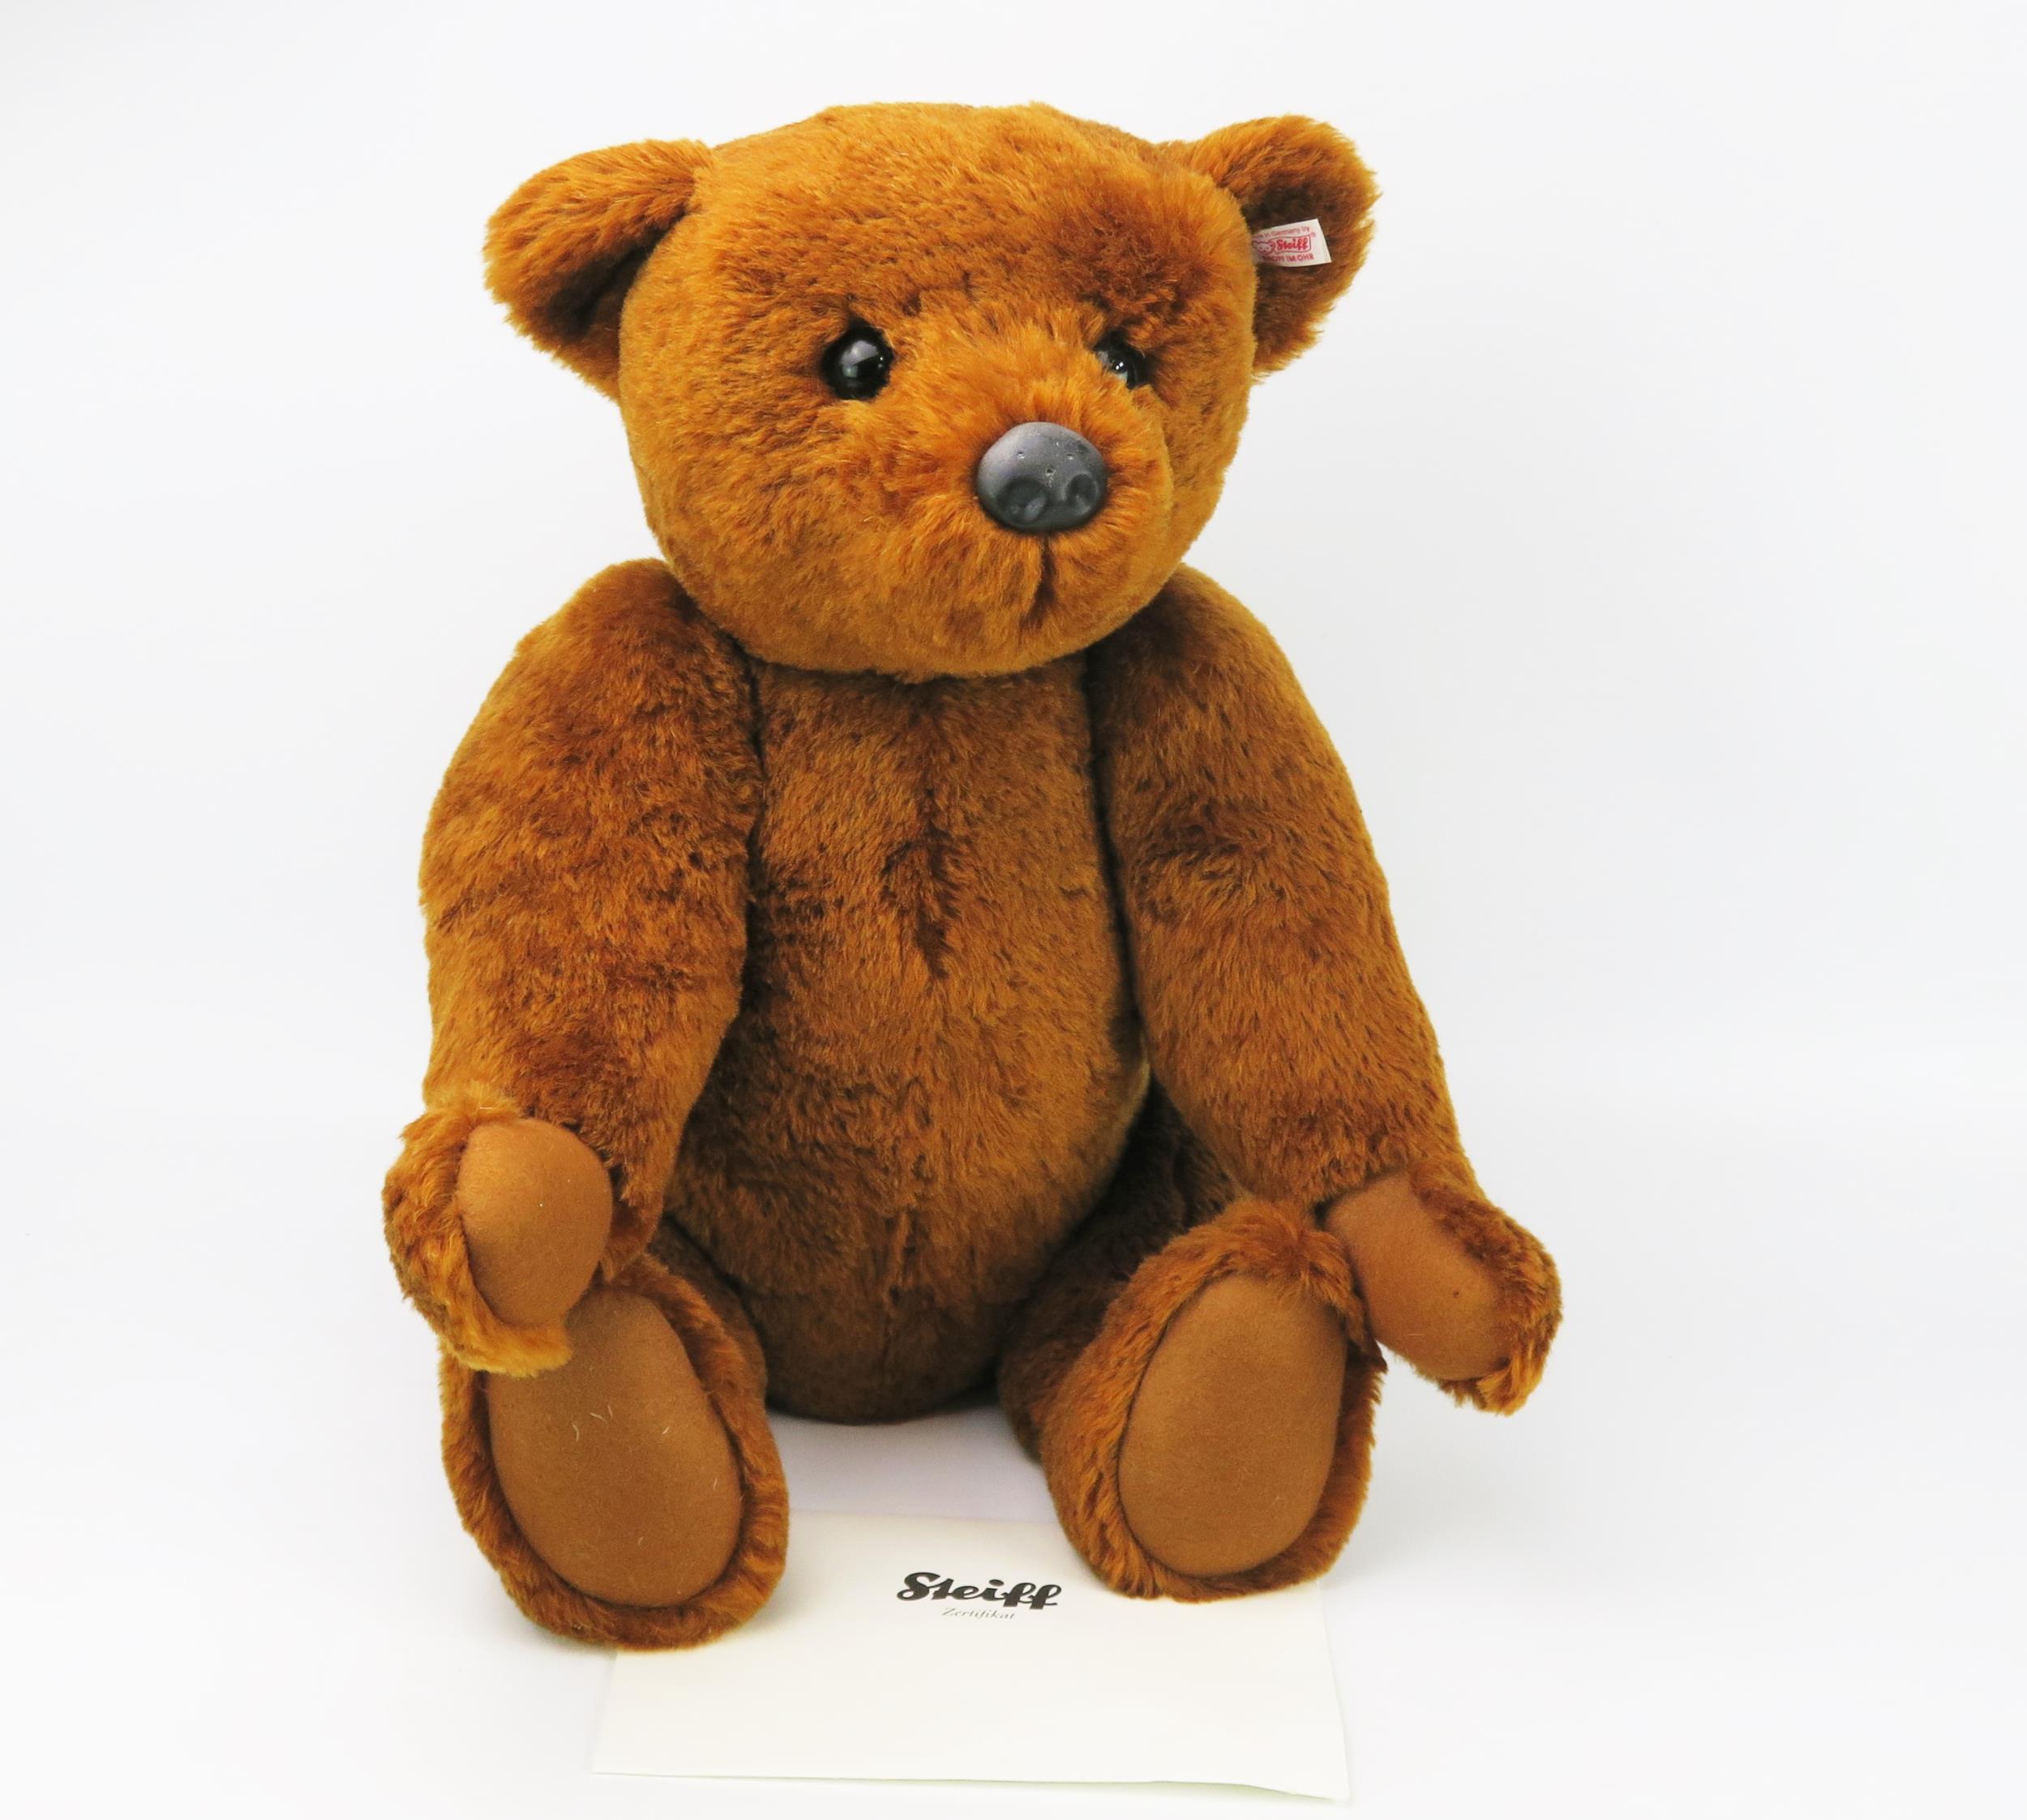 Steiff PB55 Russet Mohair Teddy Bear 663123, No. 74 of 1000 with certificate, 55cm sitting